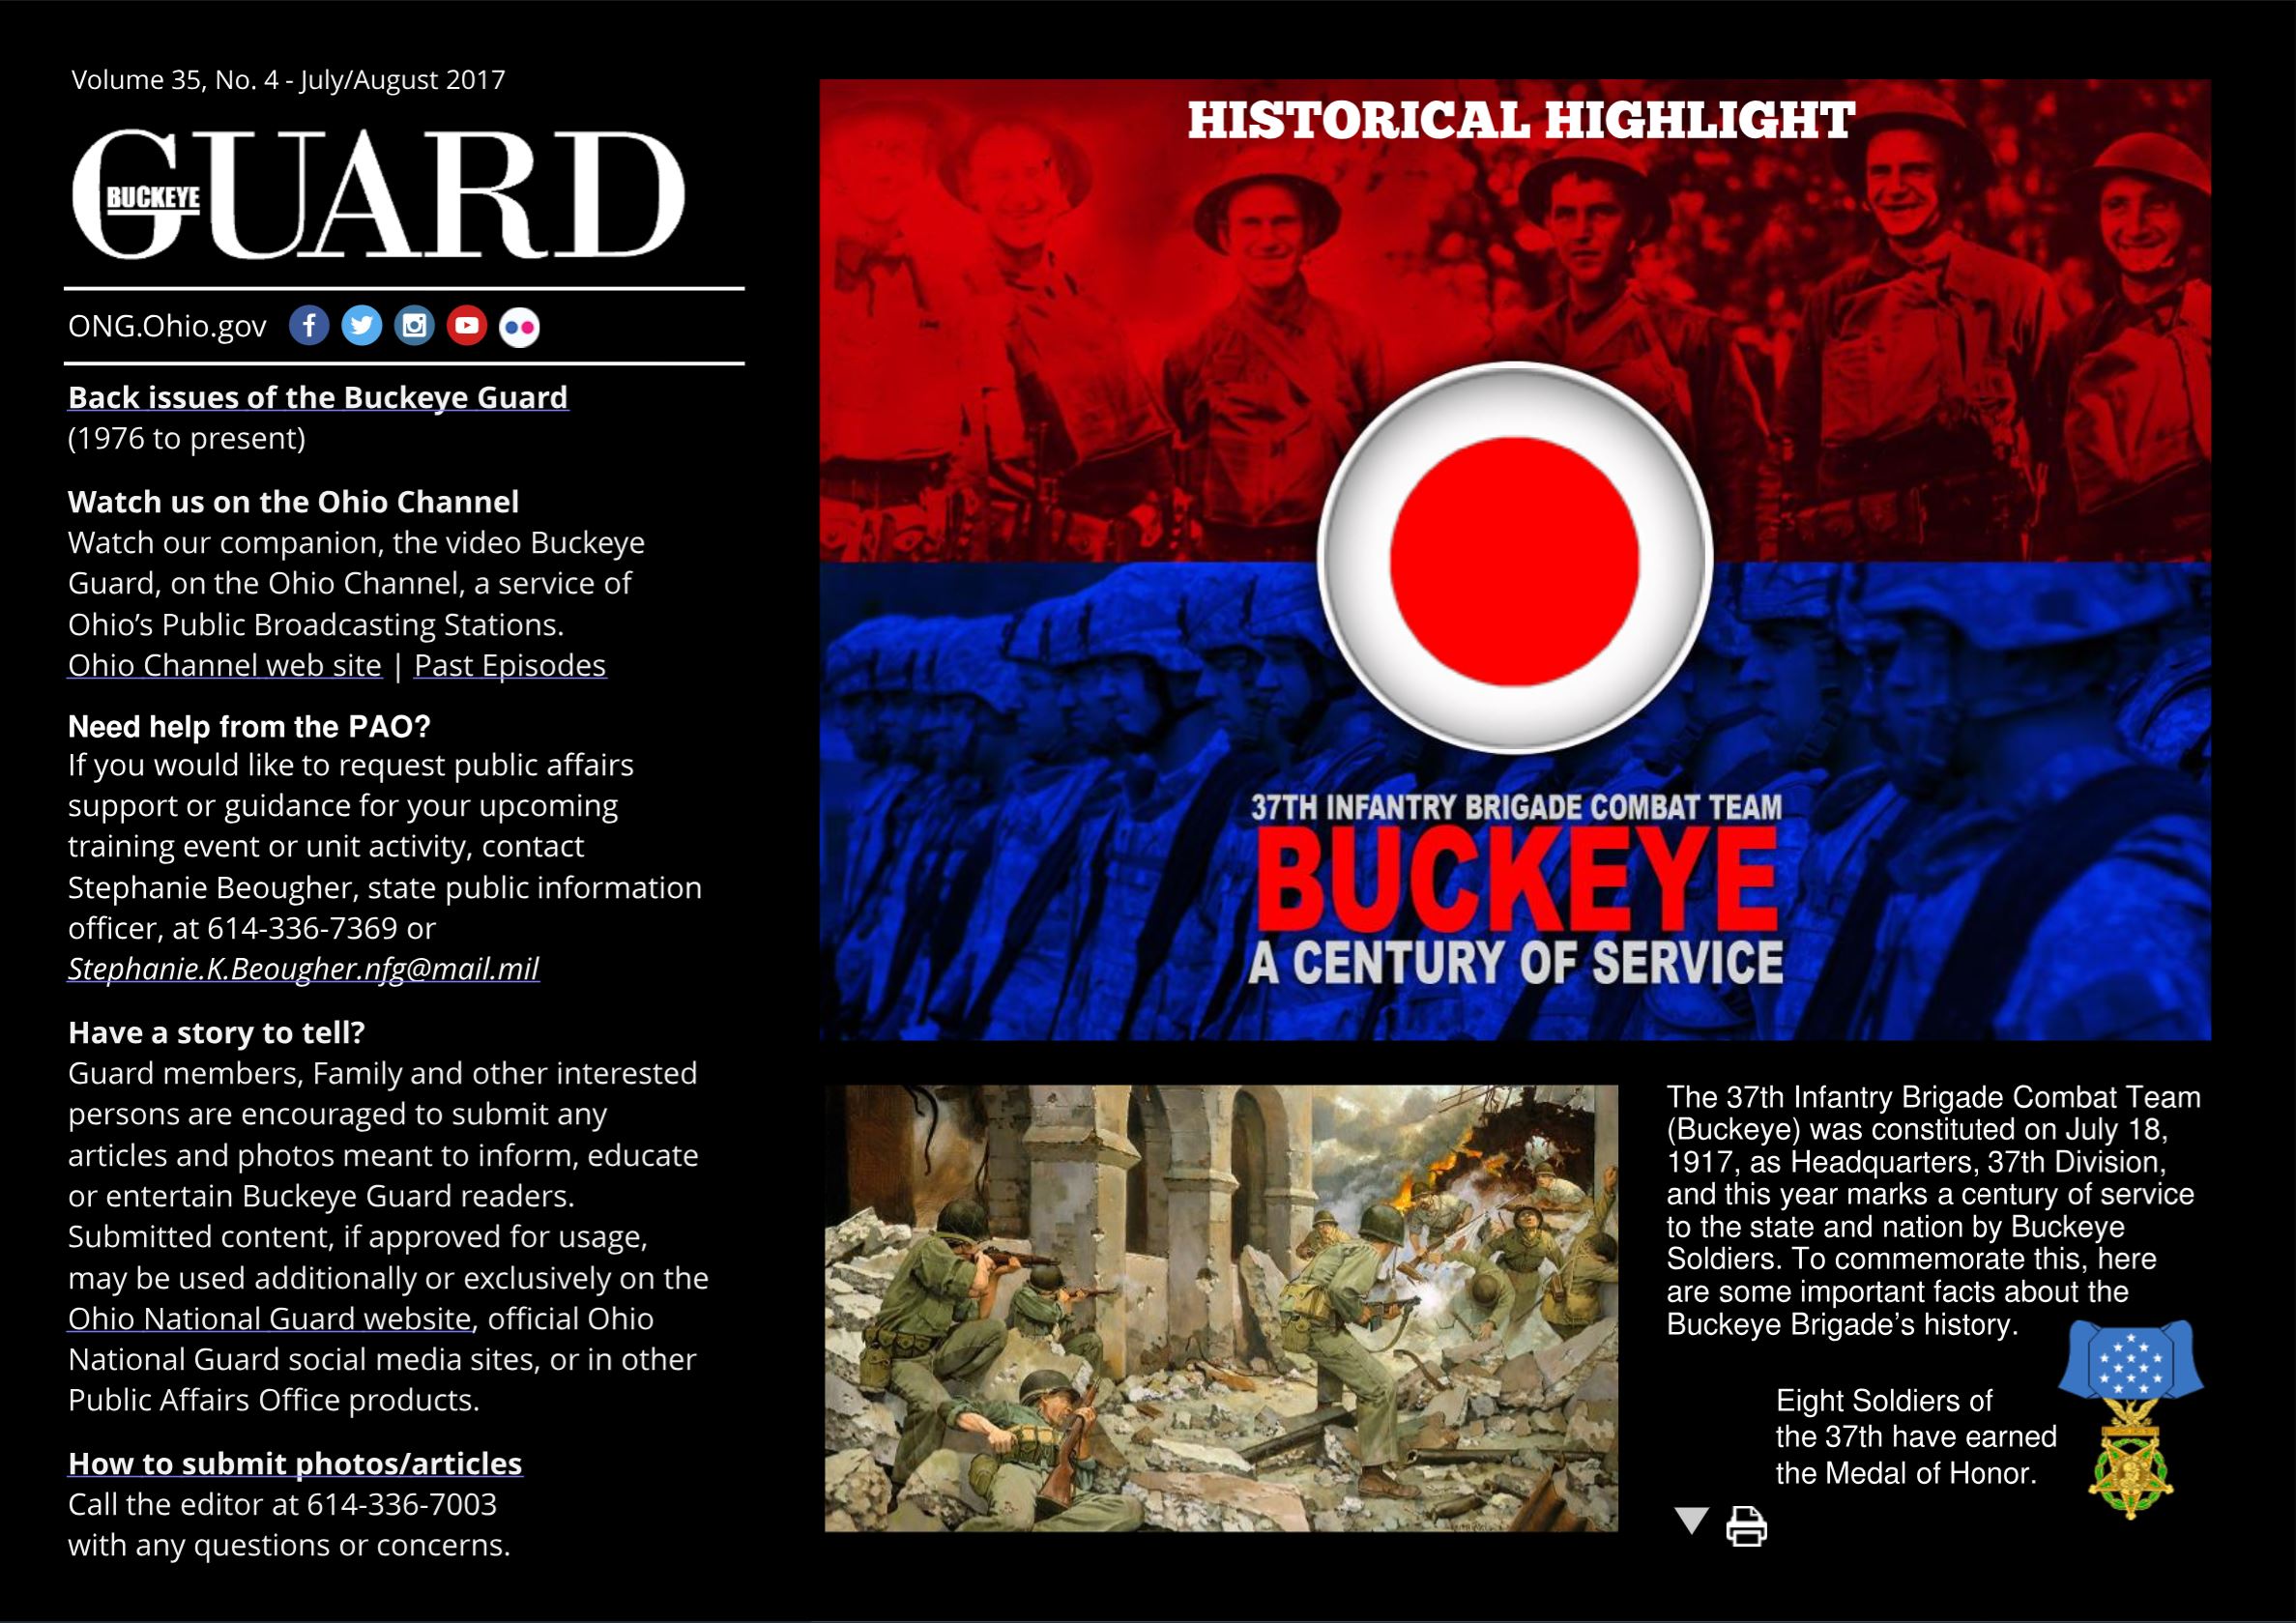 Screen shot of Historical Highlight page from 2017 July/August edition of the Buckey Guard